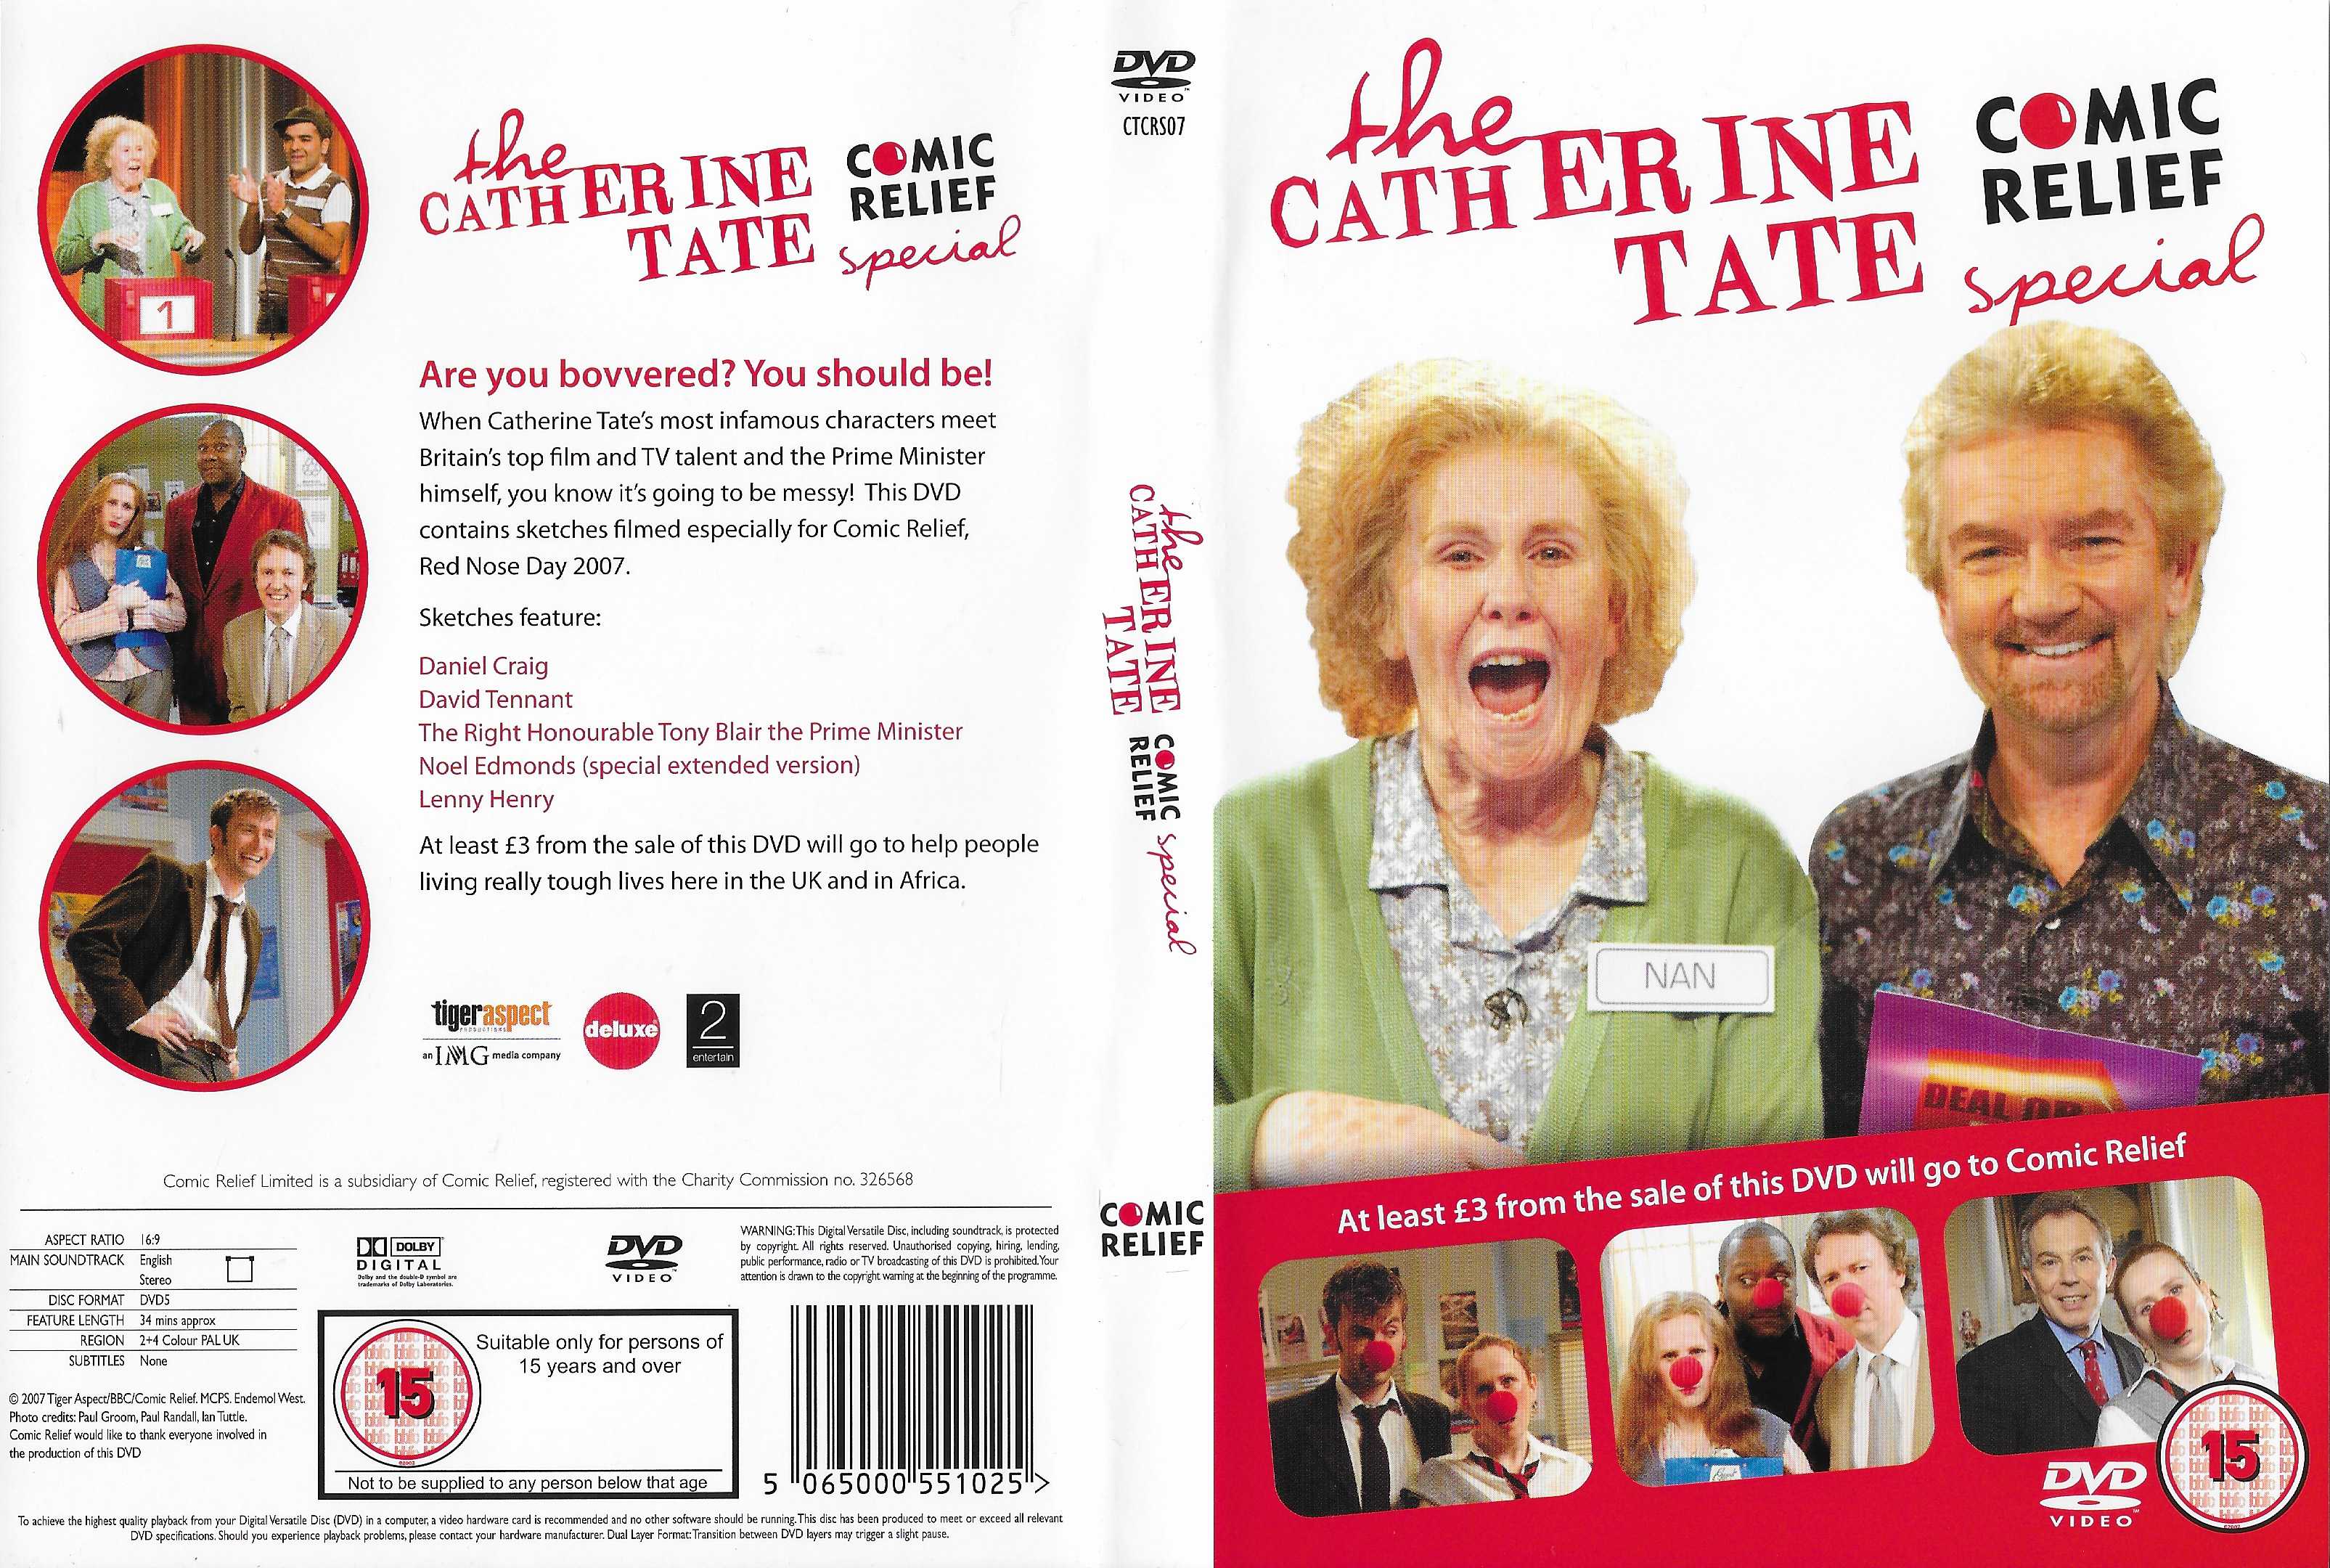 Picture of CTCRS 07 The Catherine Tate Comic Relief special by artist Catherine Tate from the BBC records and Tapes library